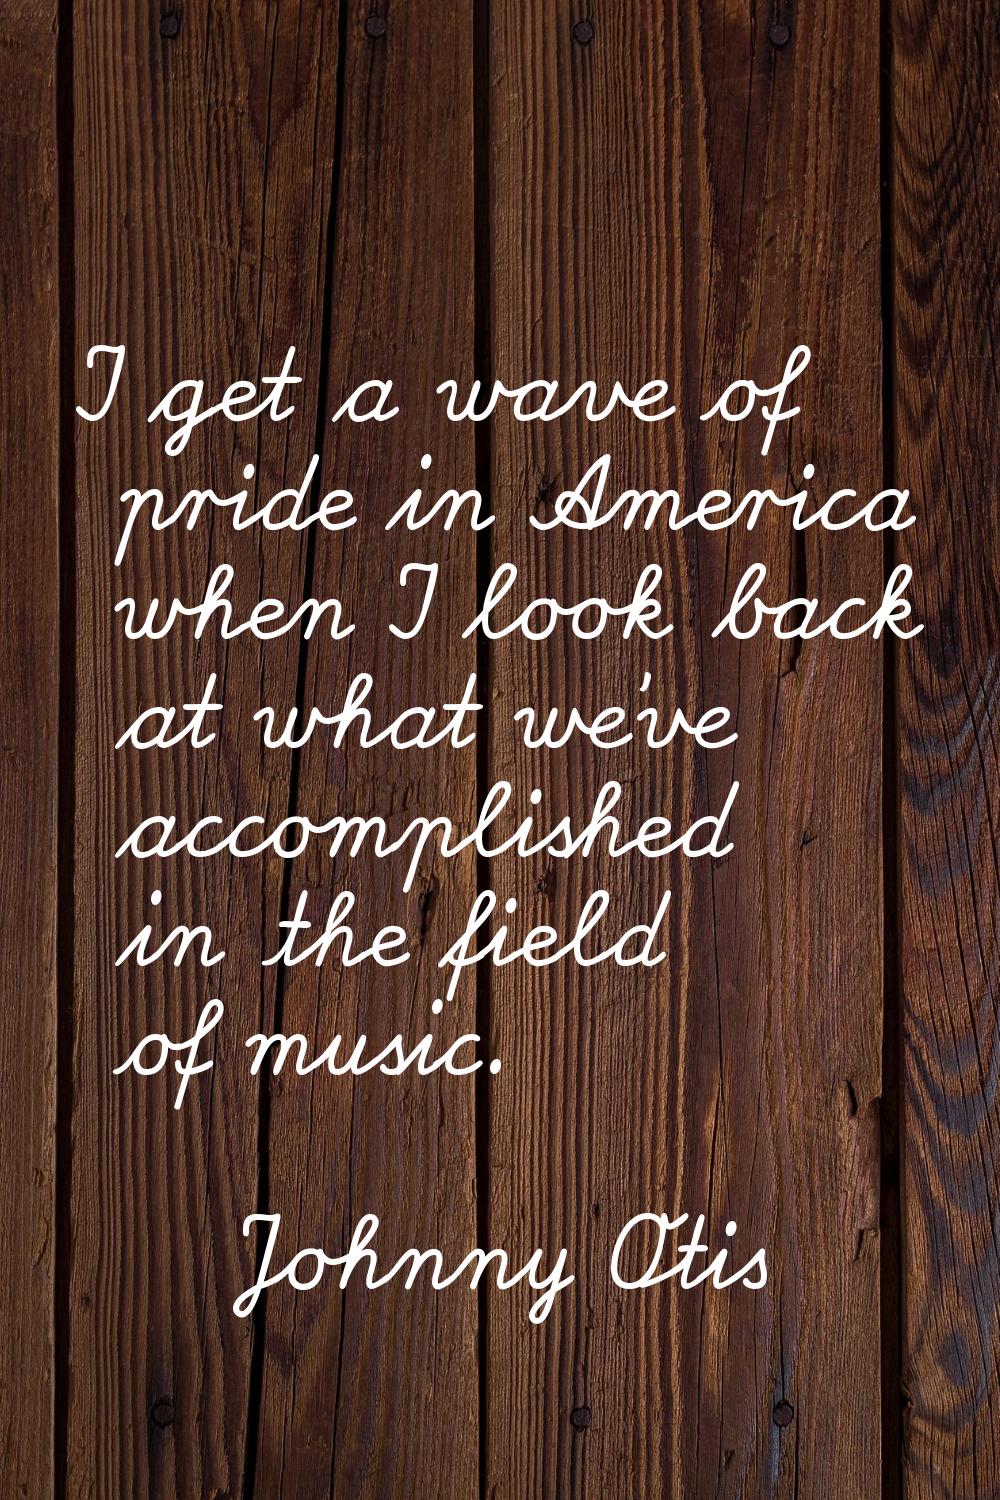 I get a wave of pride in America when I look back at what we've accomplished in the field of music.